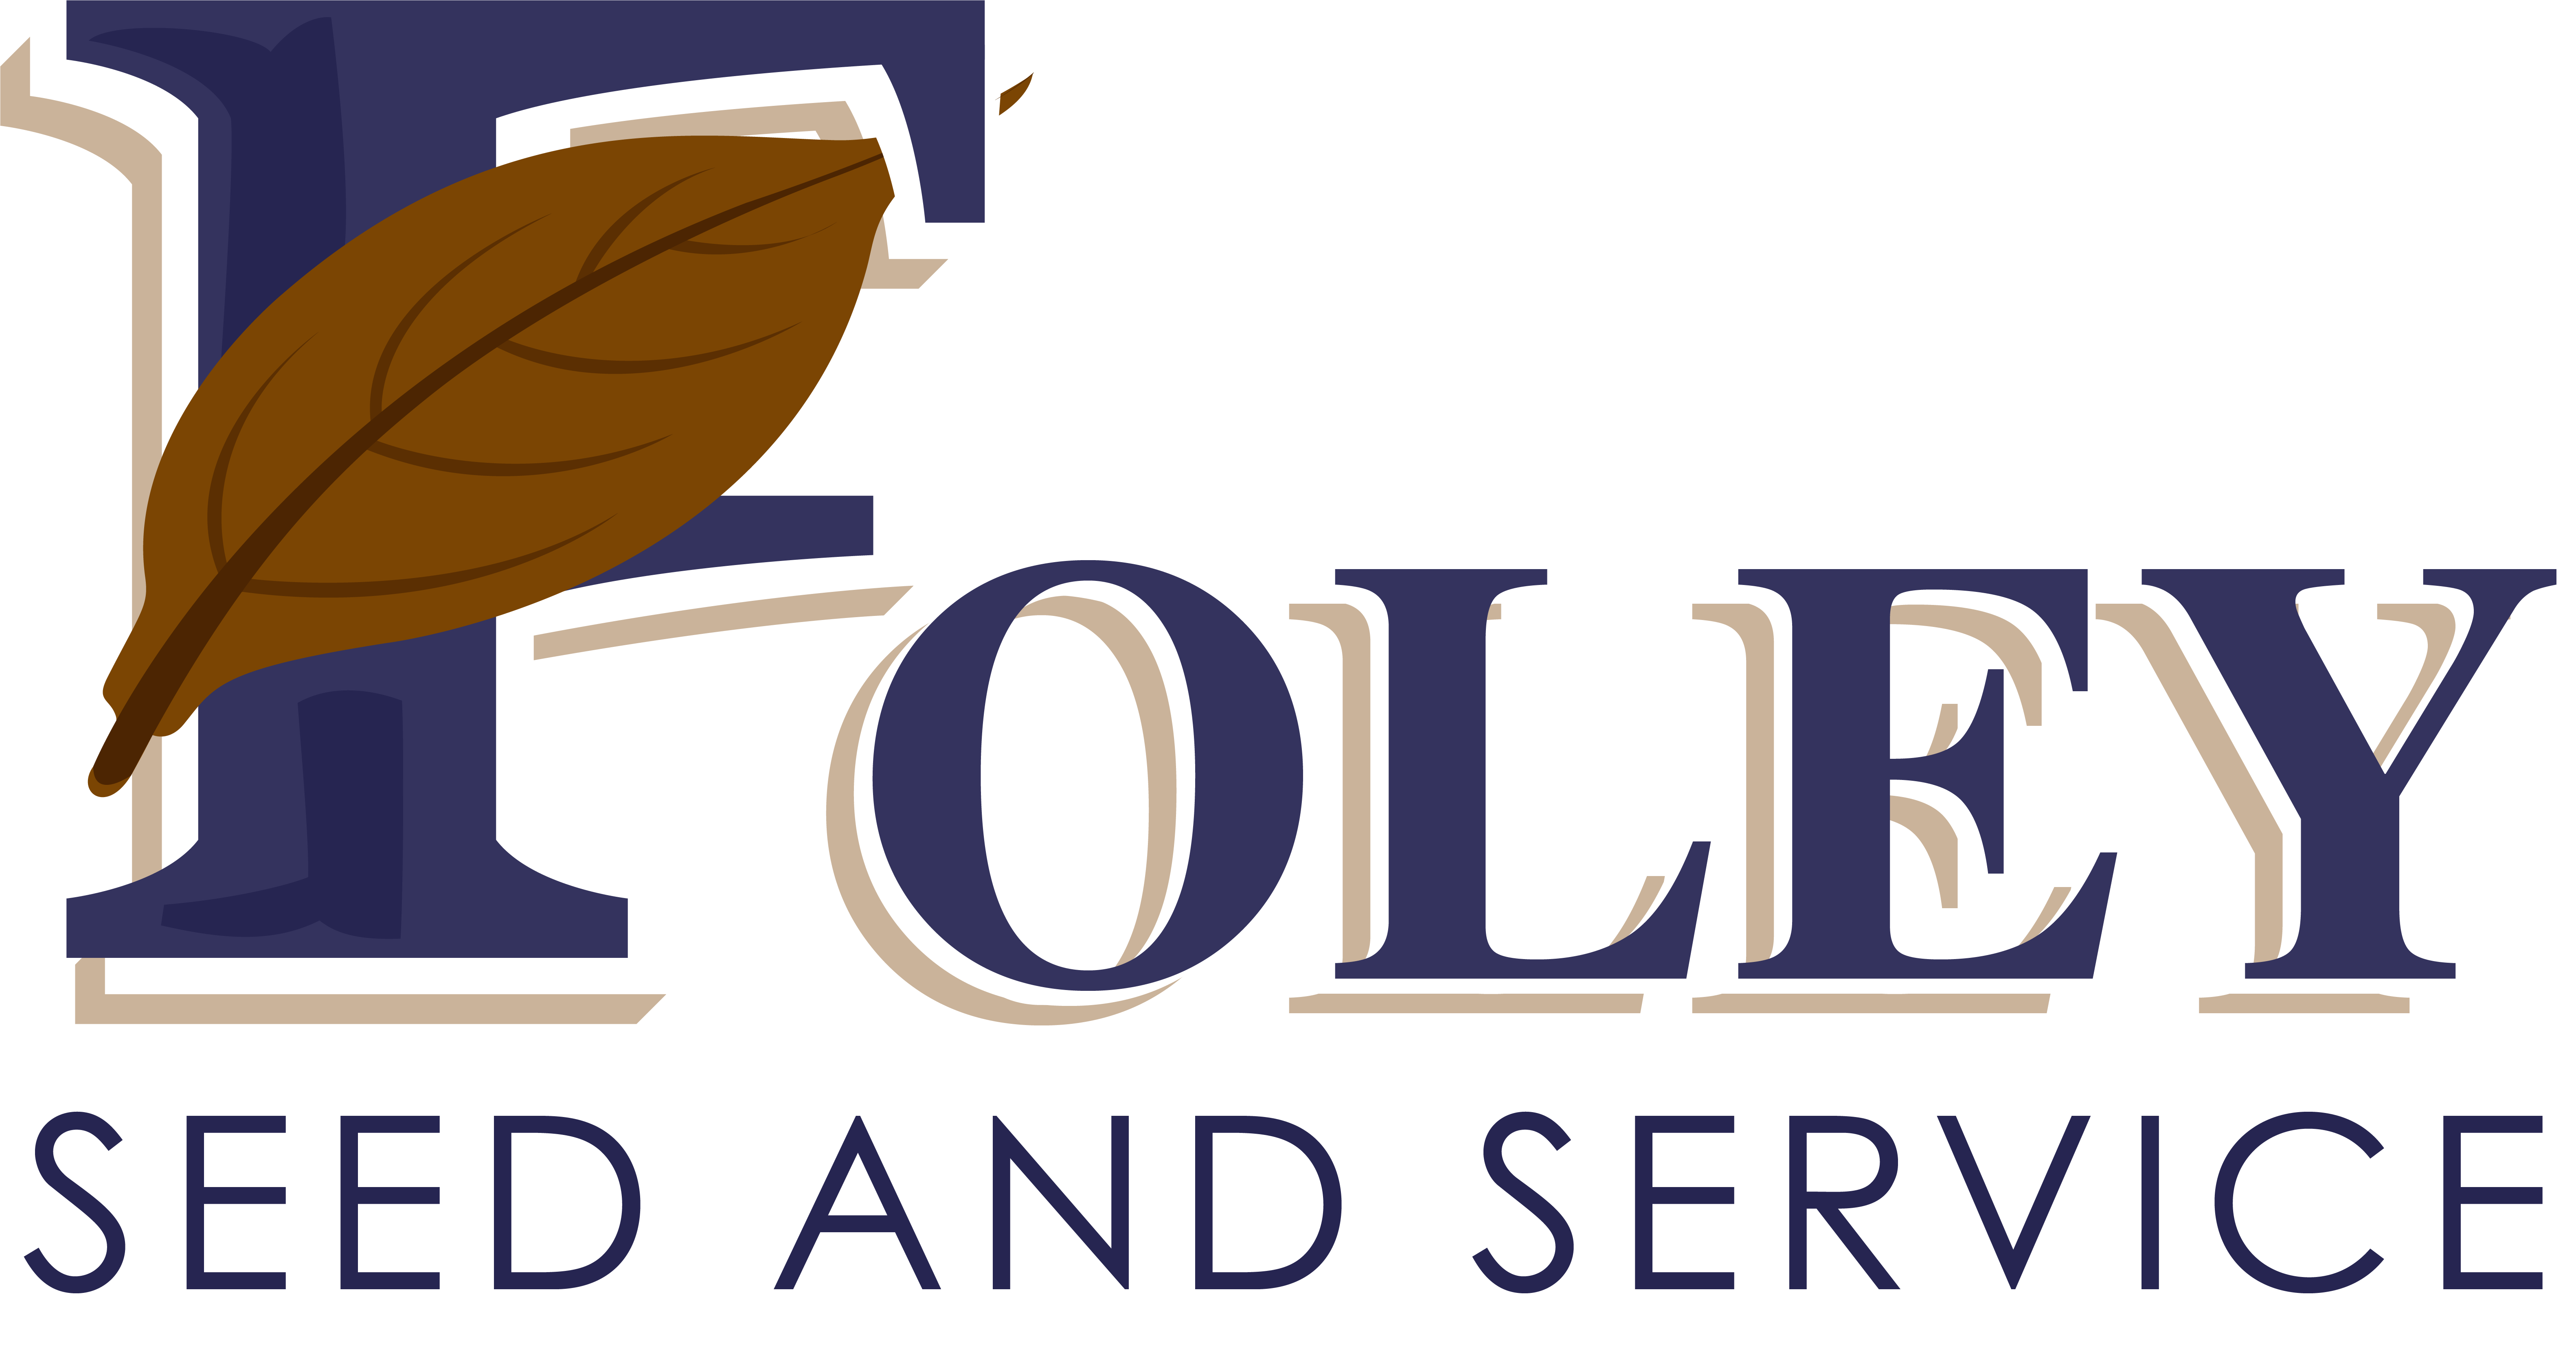 Foley Seed and Service LLC